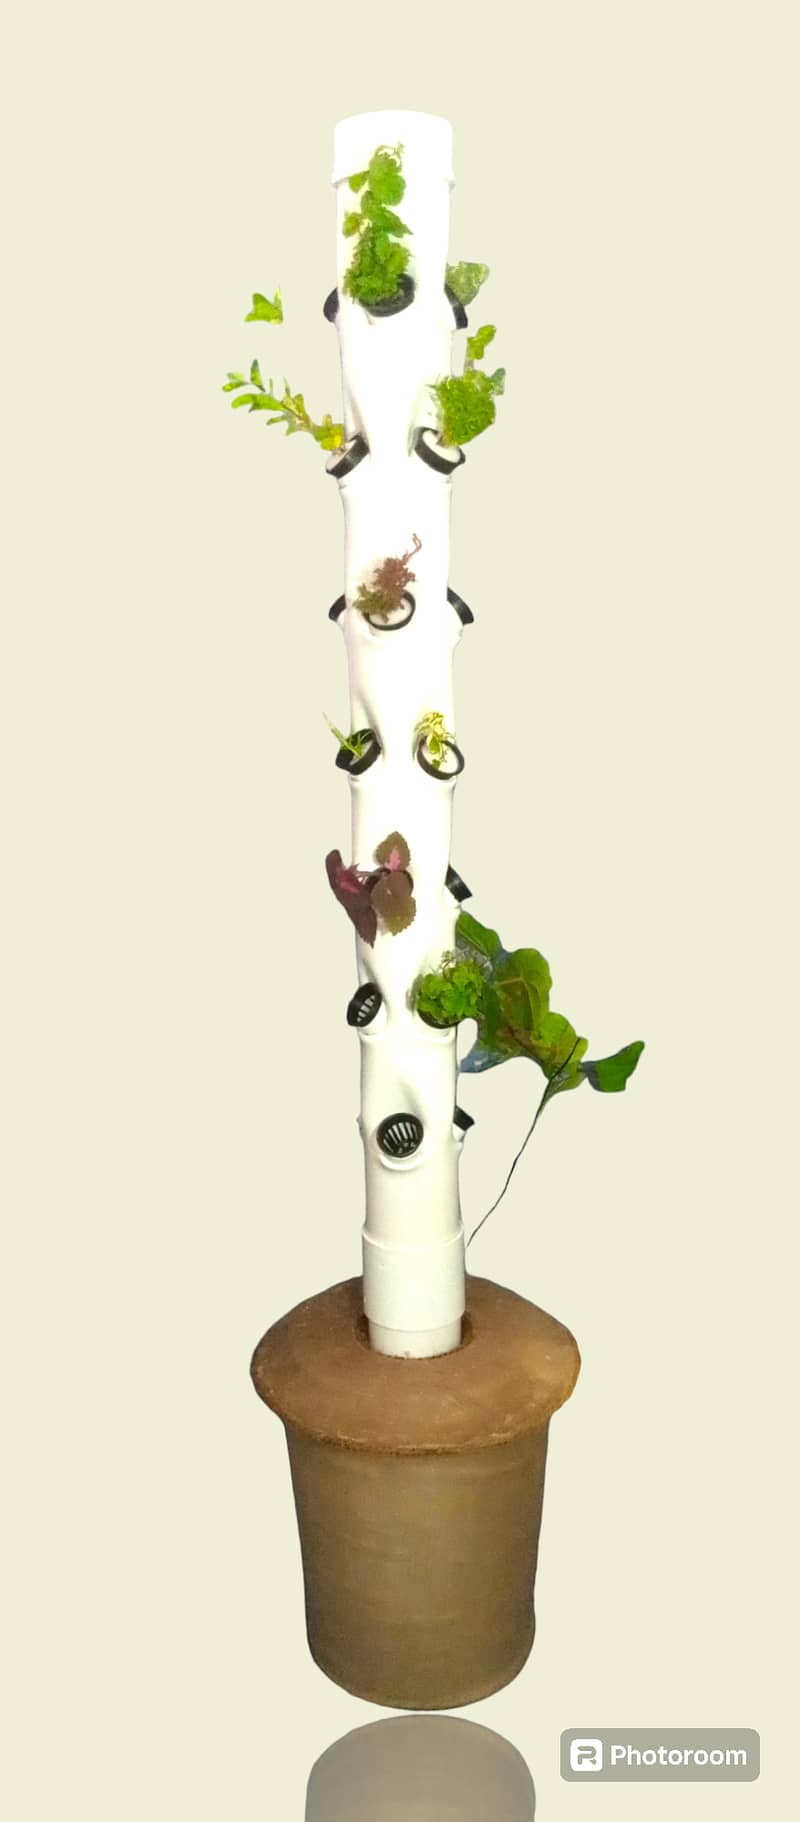 Garden Hydroponic Growing System Vertical Tower - Vegetable Pla 1